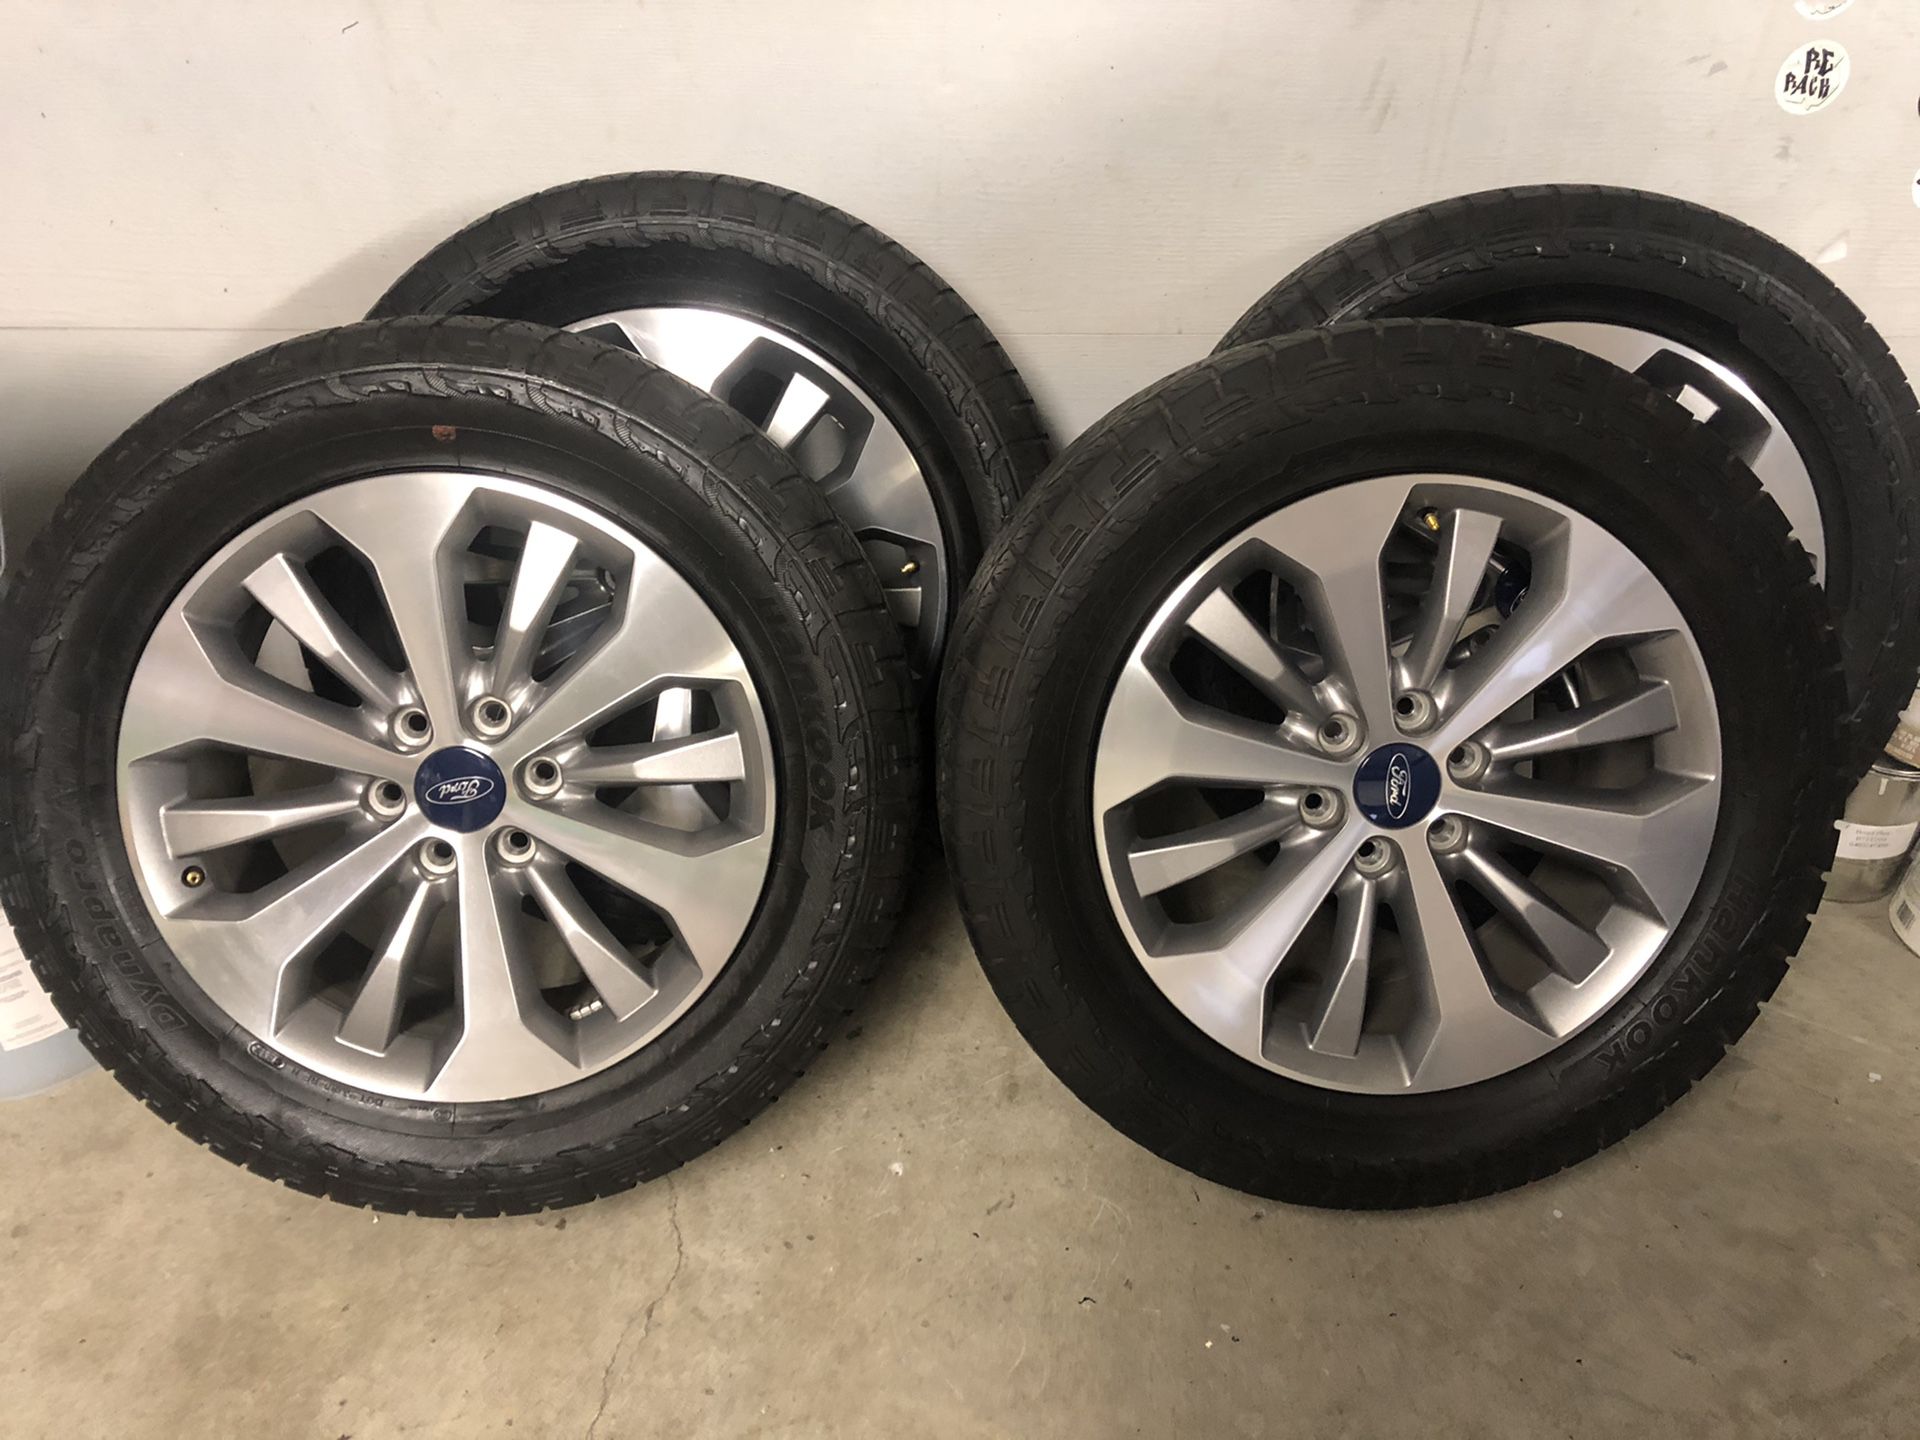 Stock ford rims and tires